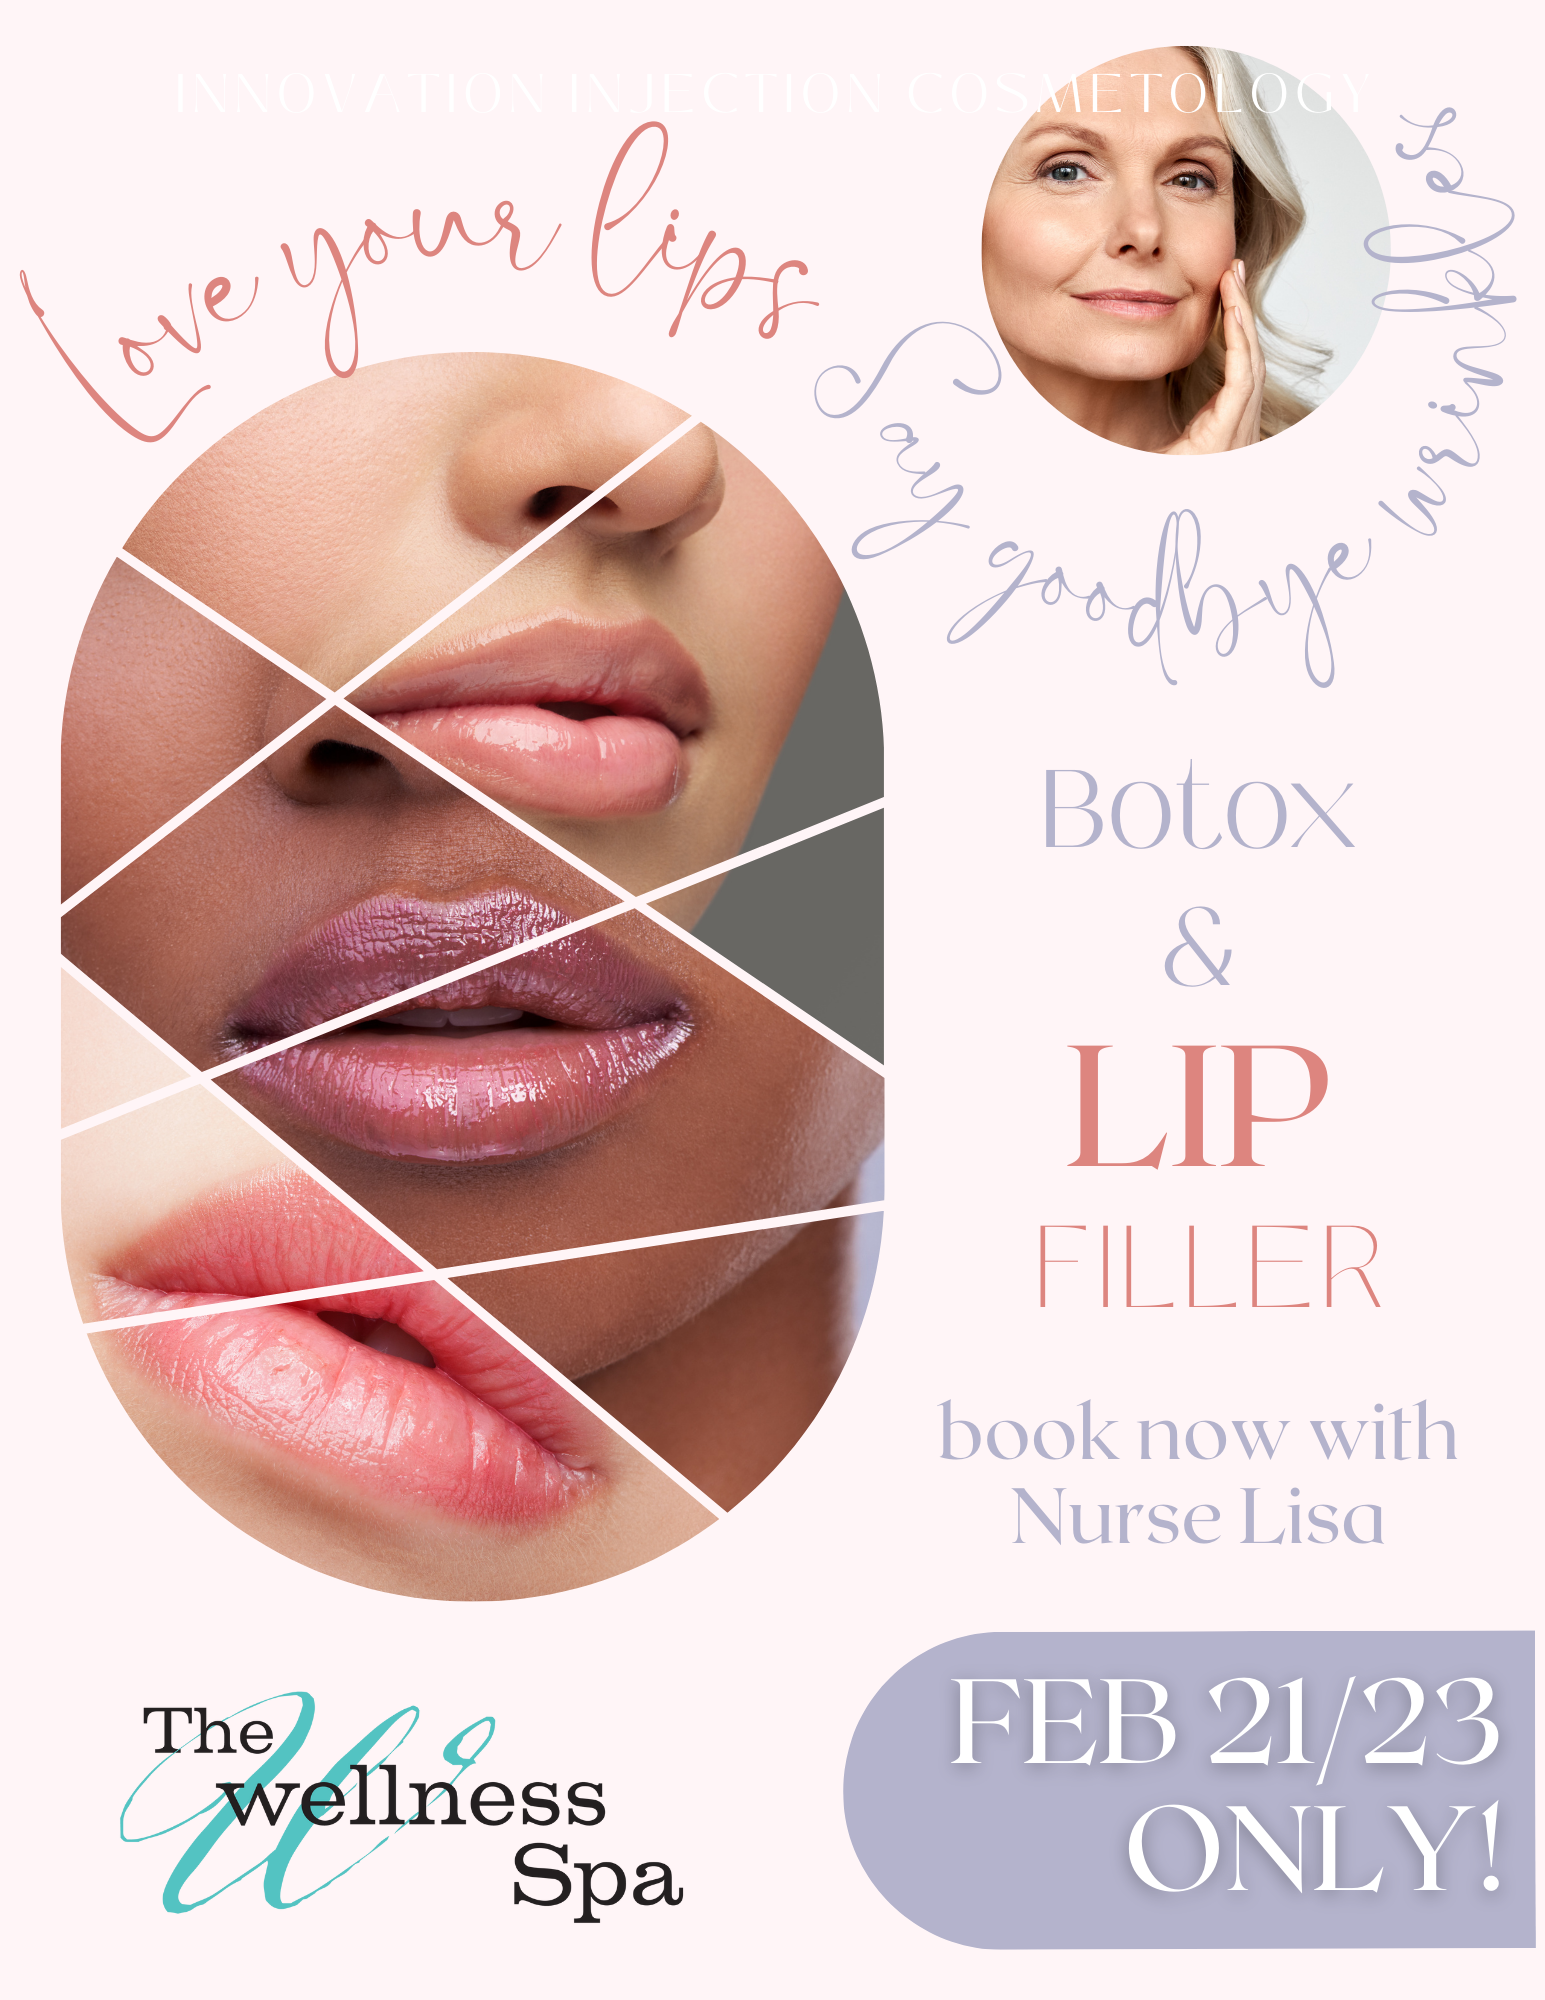 The Wellness Spa Now offers Botox and Fillers